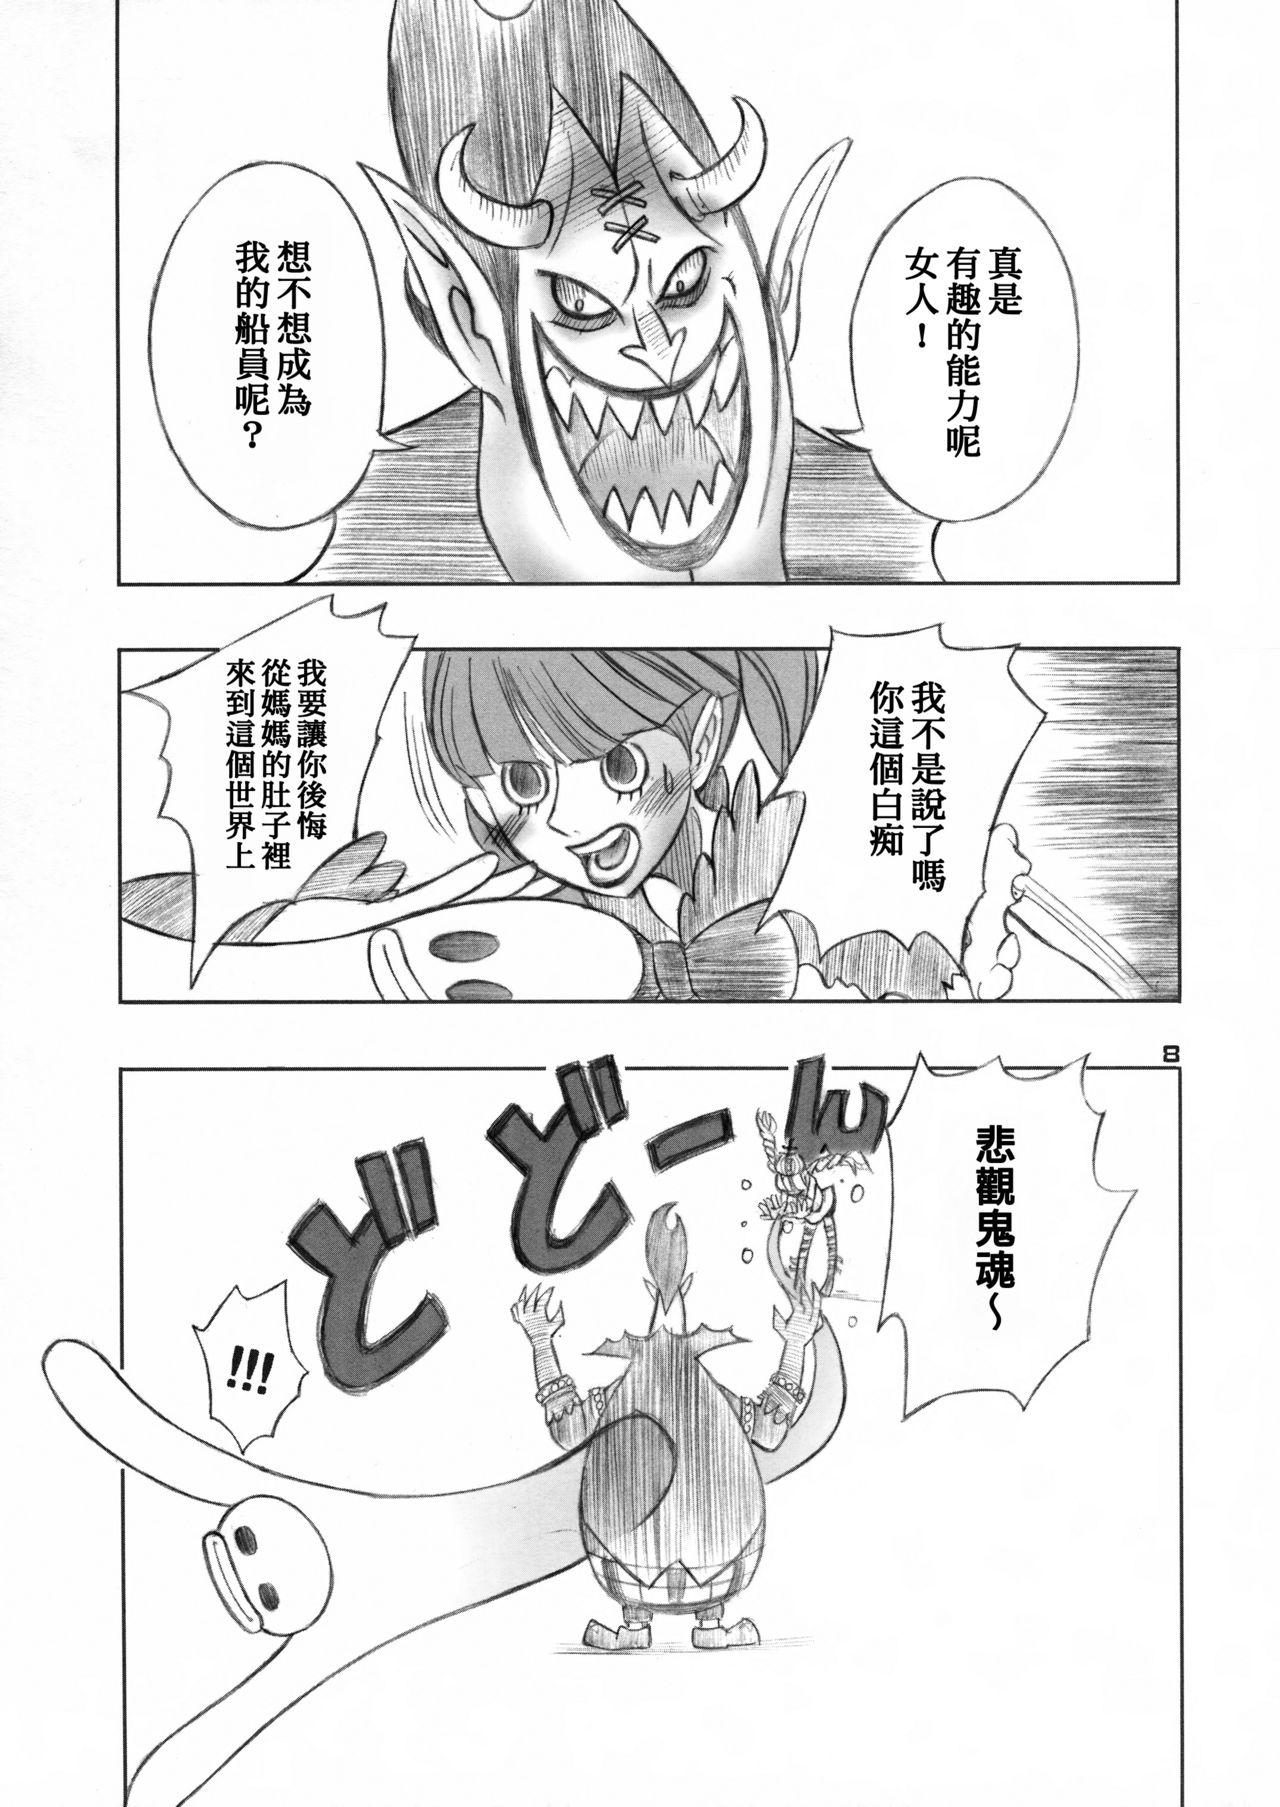 Passion PERONAKIDAN | 培羅娜奇談 - One piece Bald Pussy - Page 8